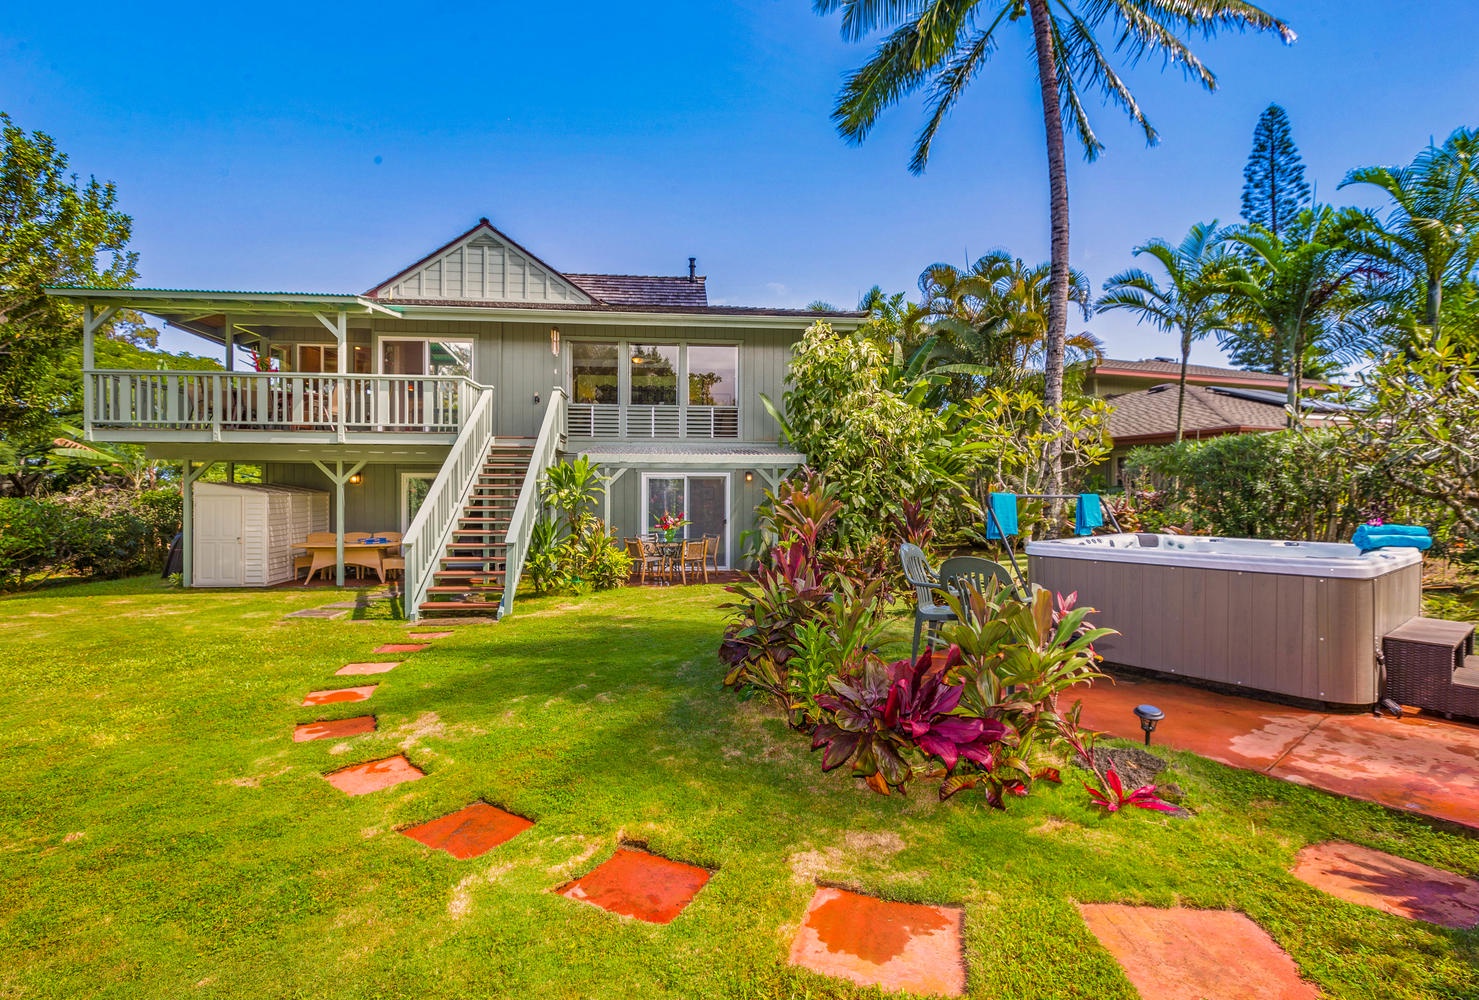 Princeville Vacation Rentals, Hale Anu Keanu - View of home from backyard